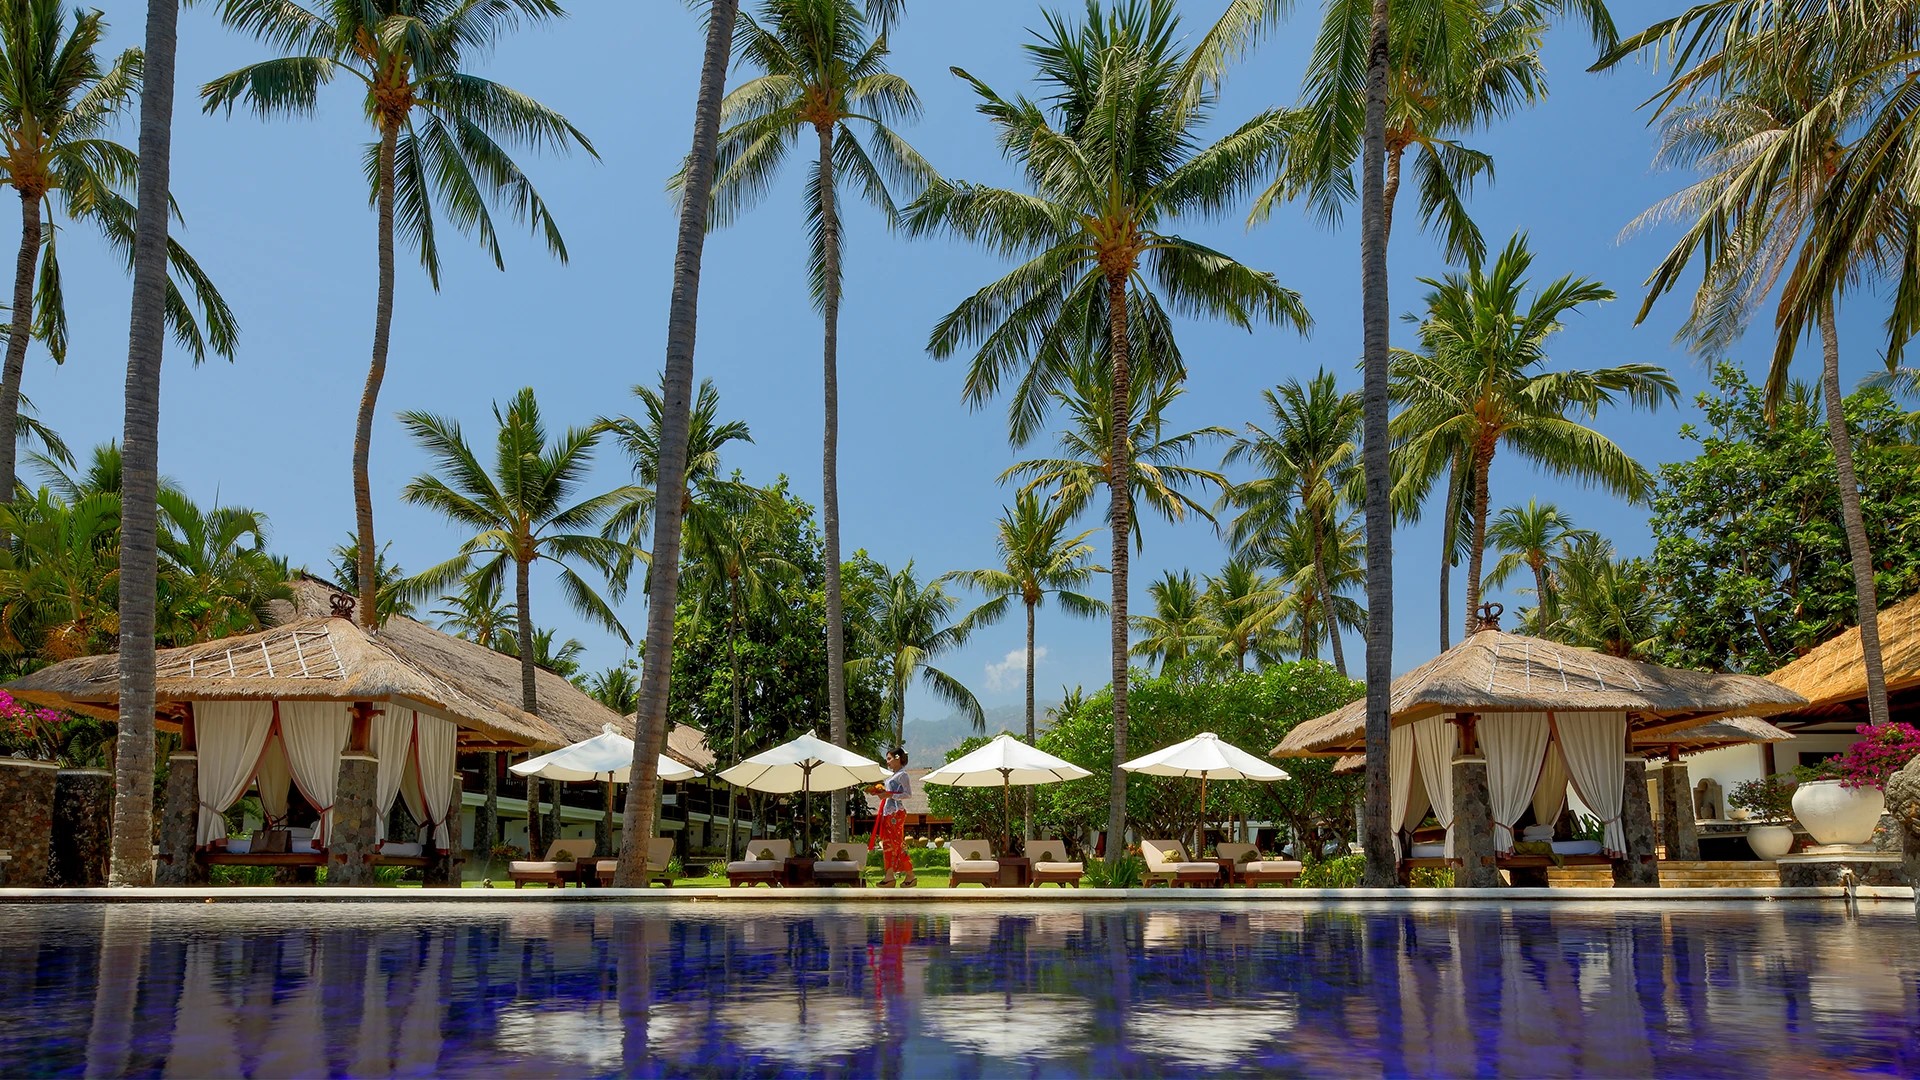 The pool at Spa Village Resort Tembok Bali, an adults-only all-inclusive resort in Bali - Luxury Escapes